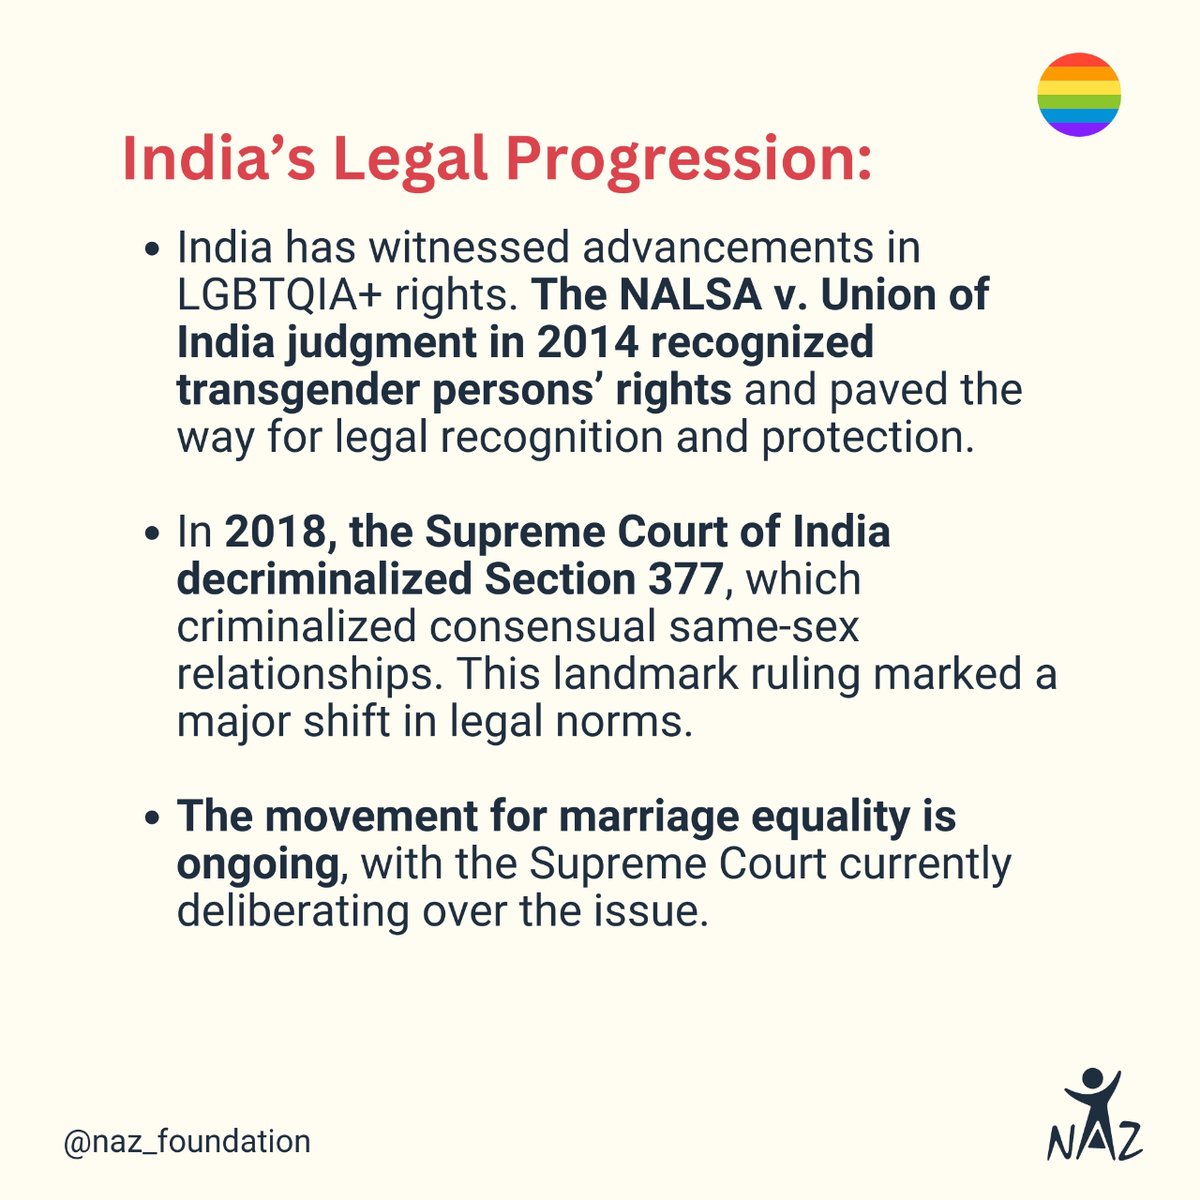 Remember that these developments are part of an ongoing journey toward equality. Let’s celebrate the progress made while acknowledging the work that lies ahead! 🌈
#nazfoundation #pride #loveislove #internationdayagainsthomophobia  #lgbtqiacommunity #queerindia #queerhistory